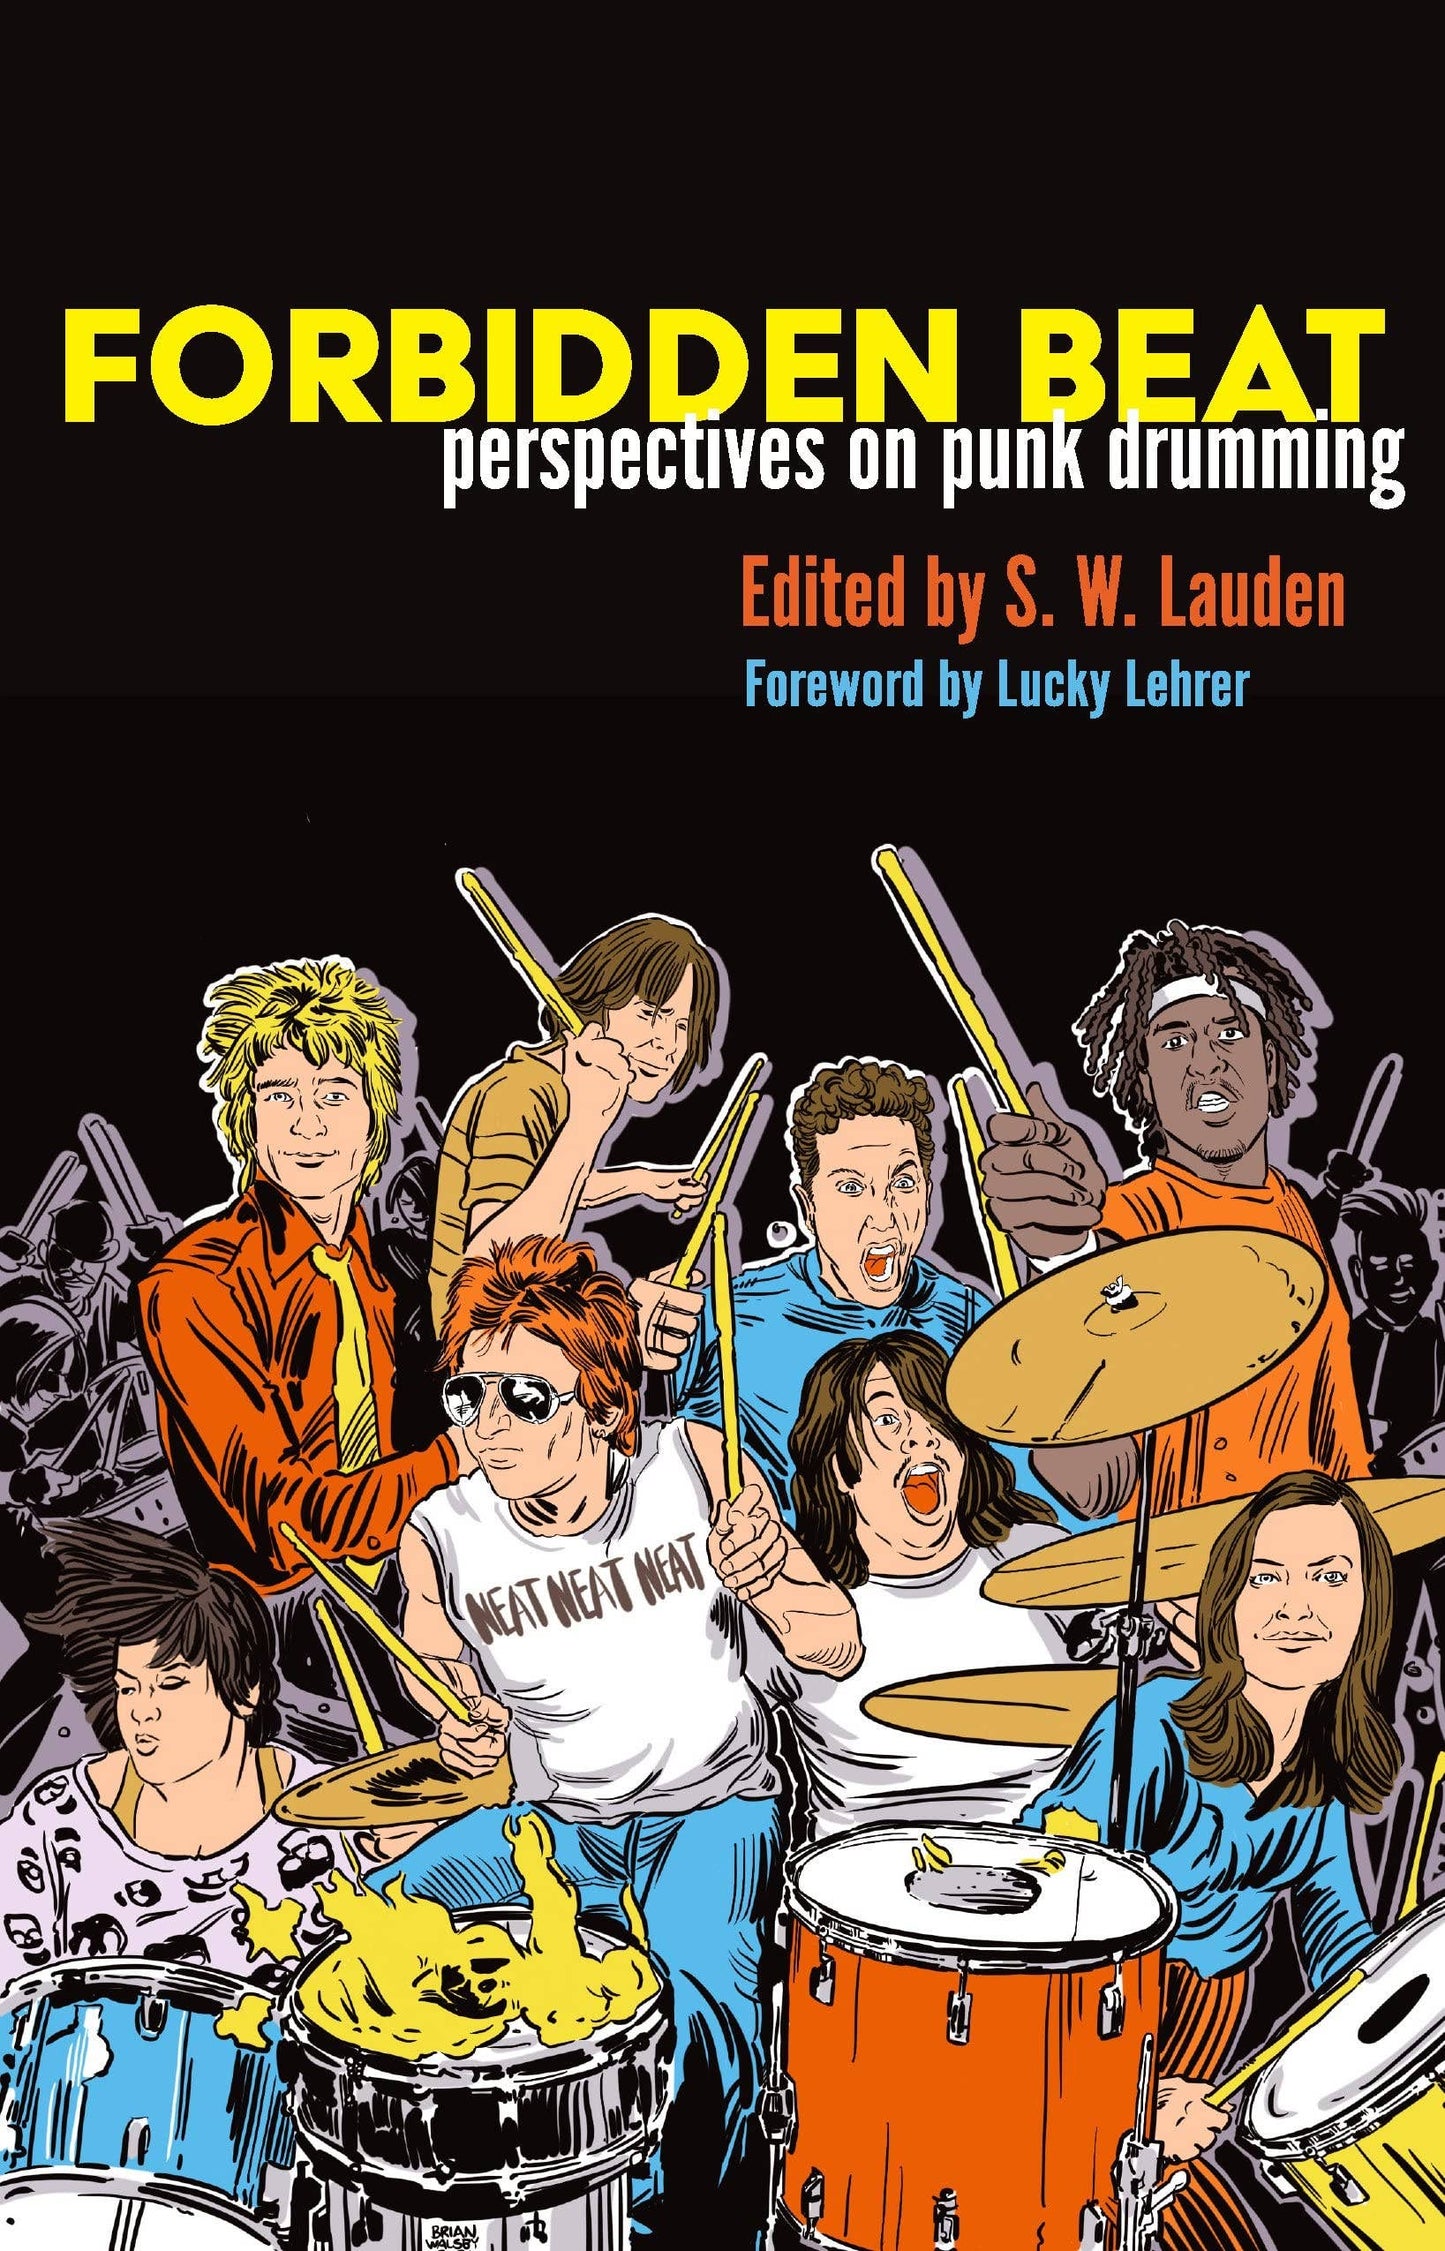 Microcosm Publishing & Distribution - Forbidden Beat: Perspectives on Punk Drumming